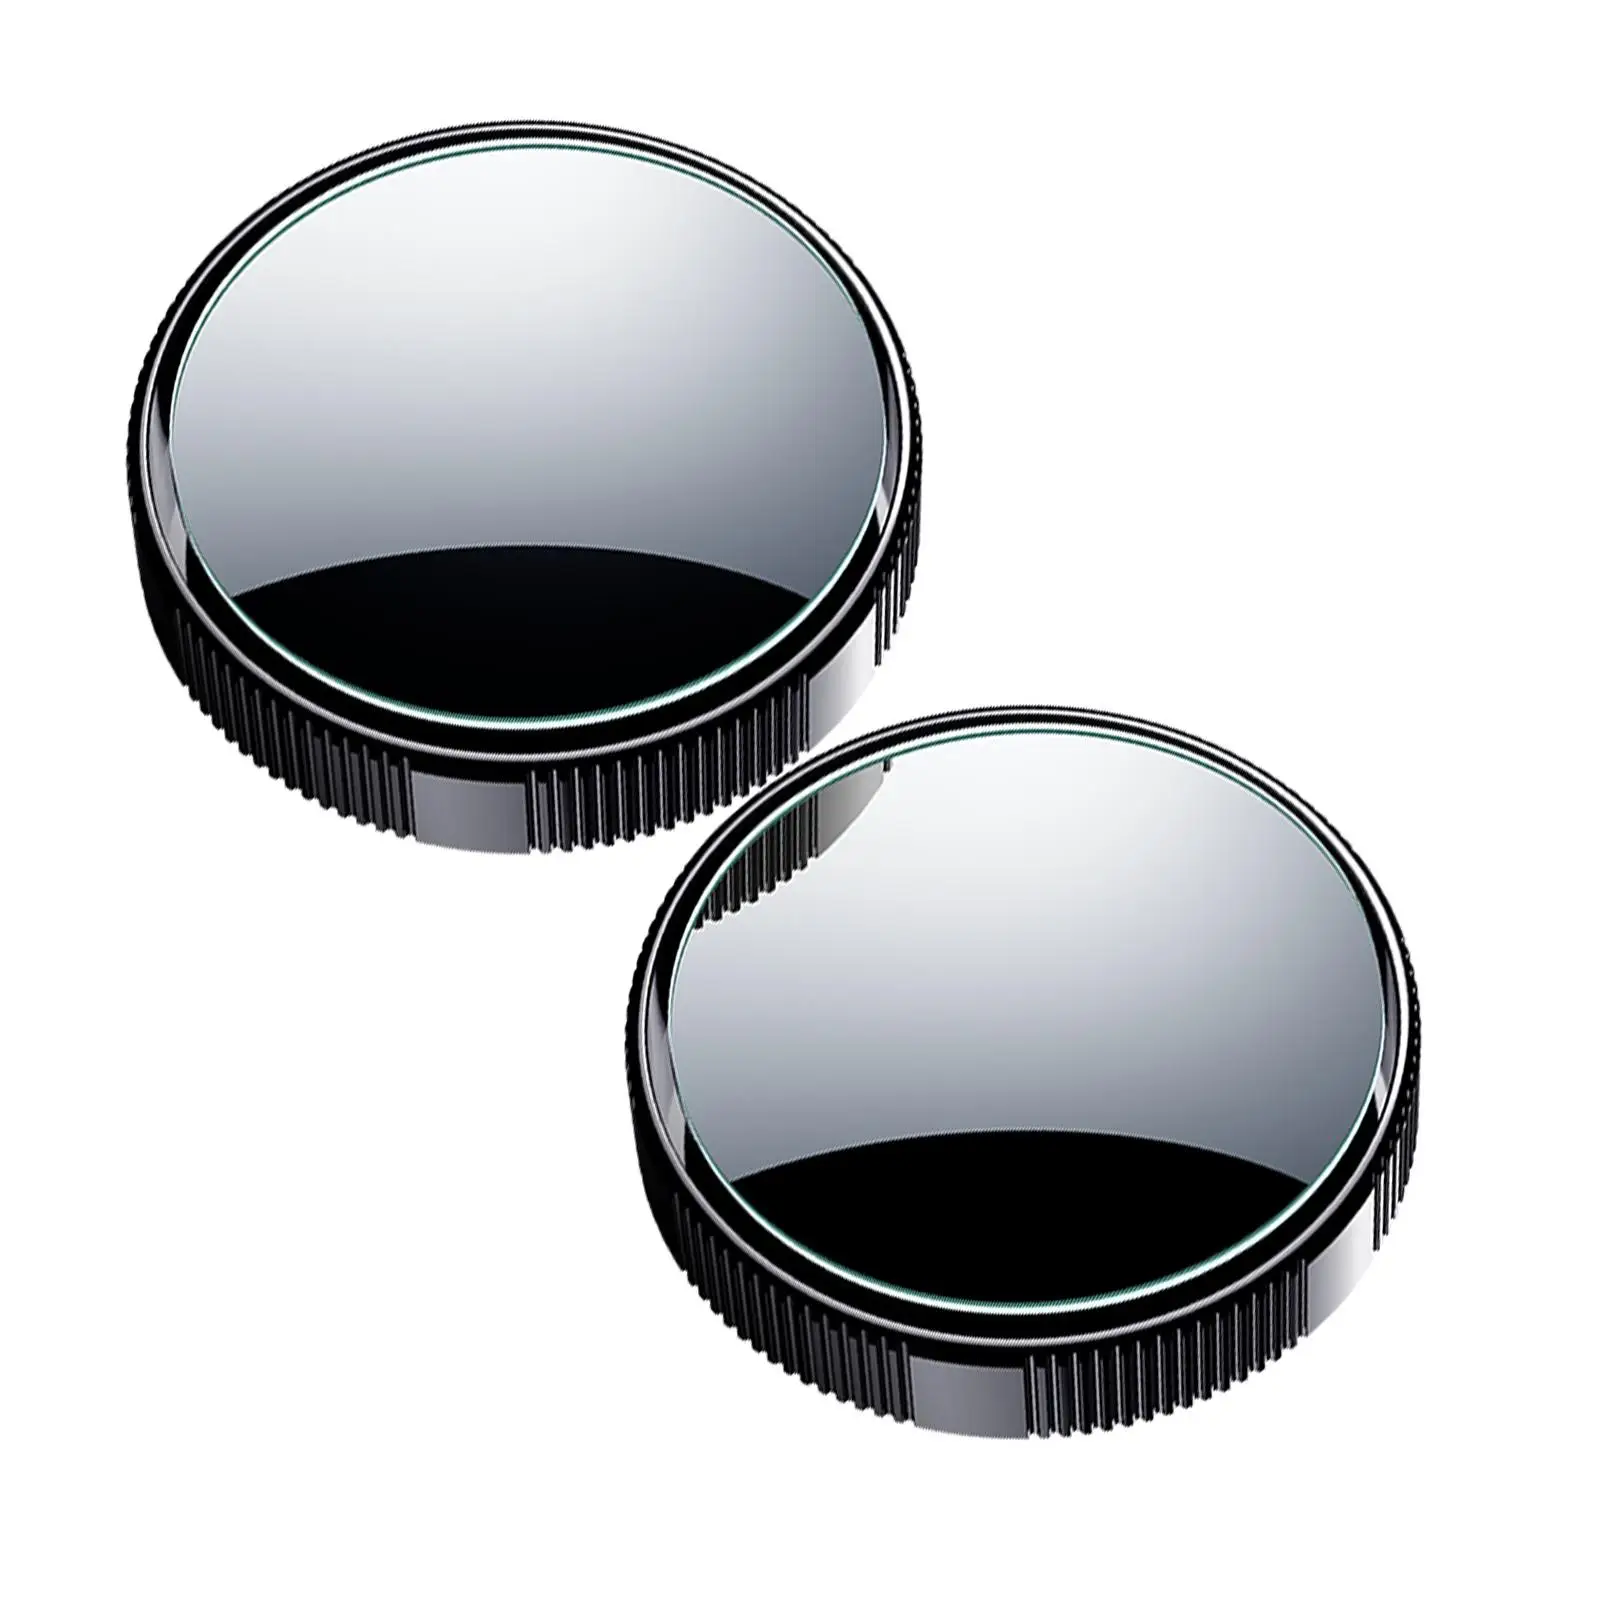 2x Round Blind Spot Mirrors Side Rearview Mirror for Cars SUV Trucks